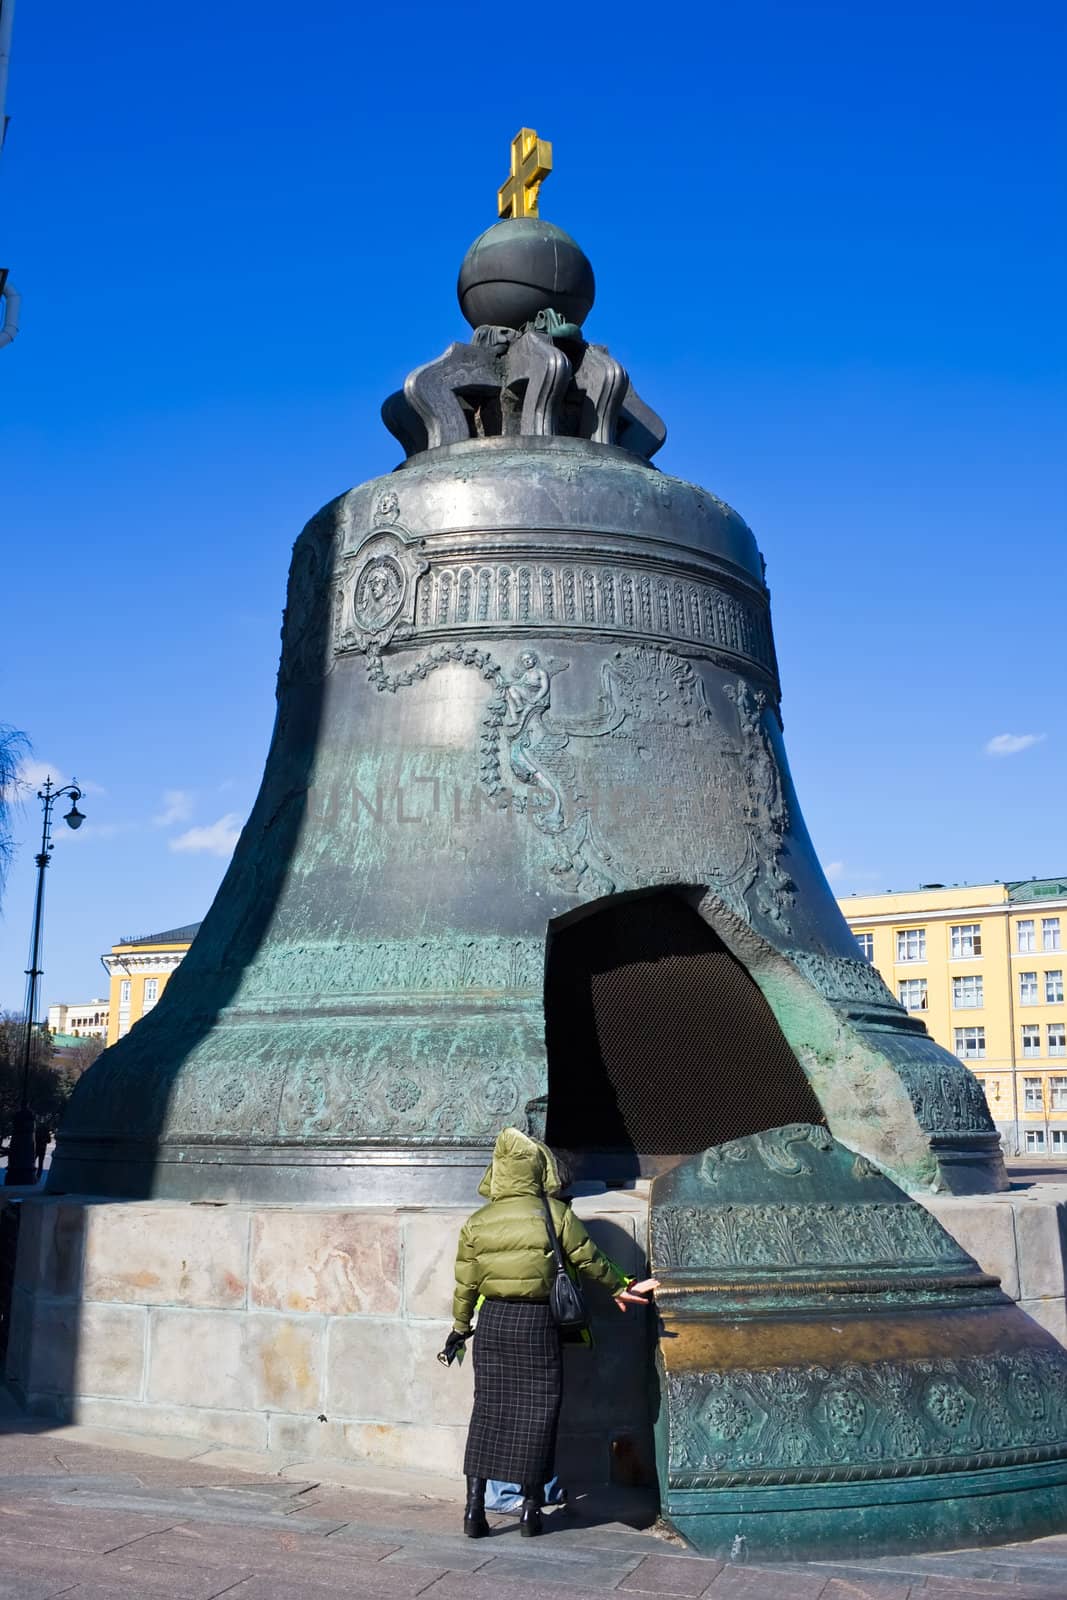 Tsar (king) Bell is the largest in the world, Moscow Kremlin, Russia